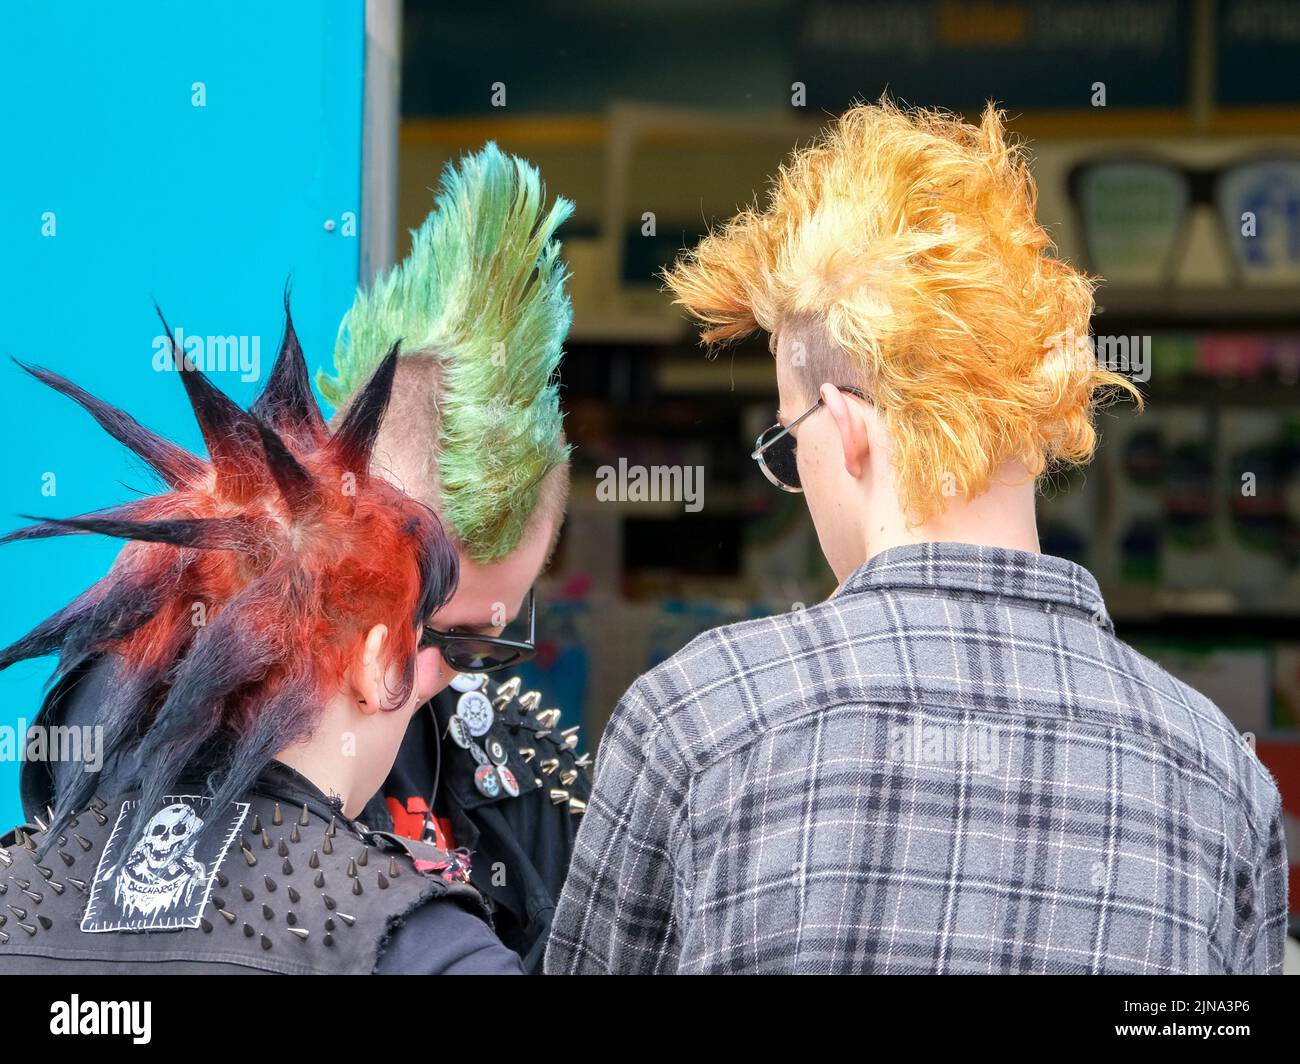 Blue Hair and Rebellion: How Crust Punks Use Their Hair to Make a Statement - wide 1